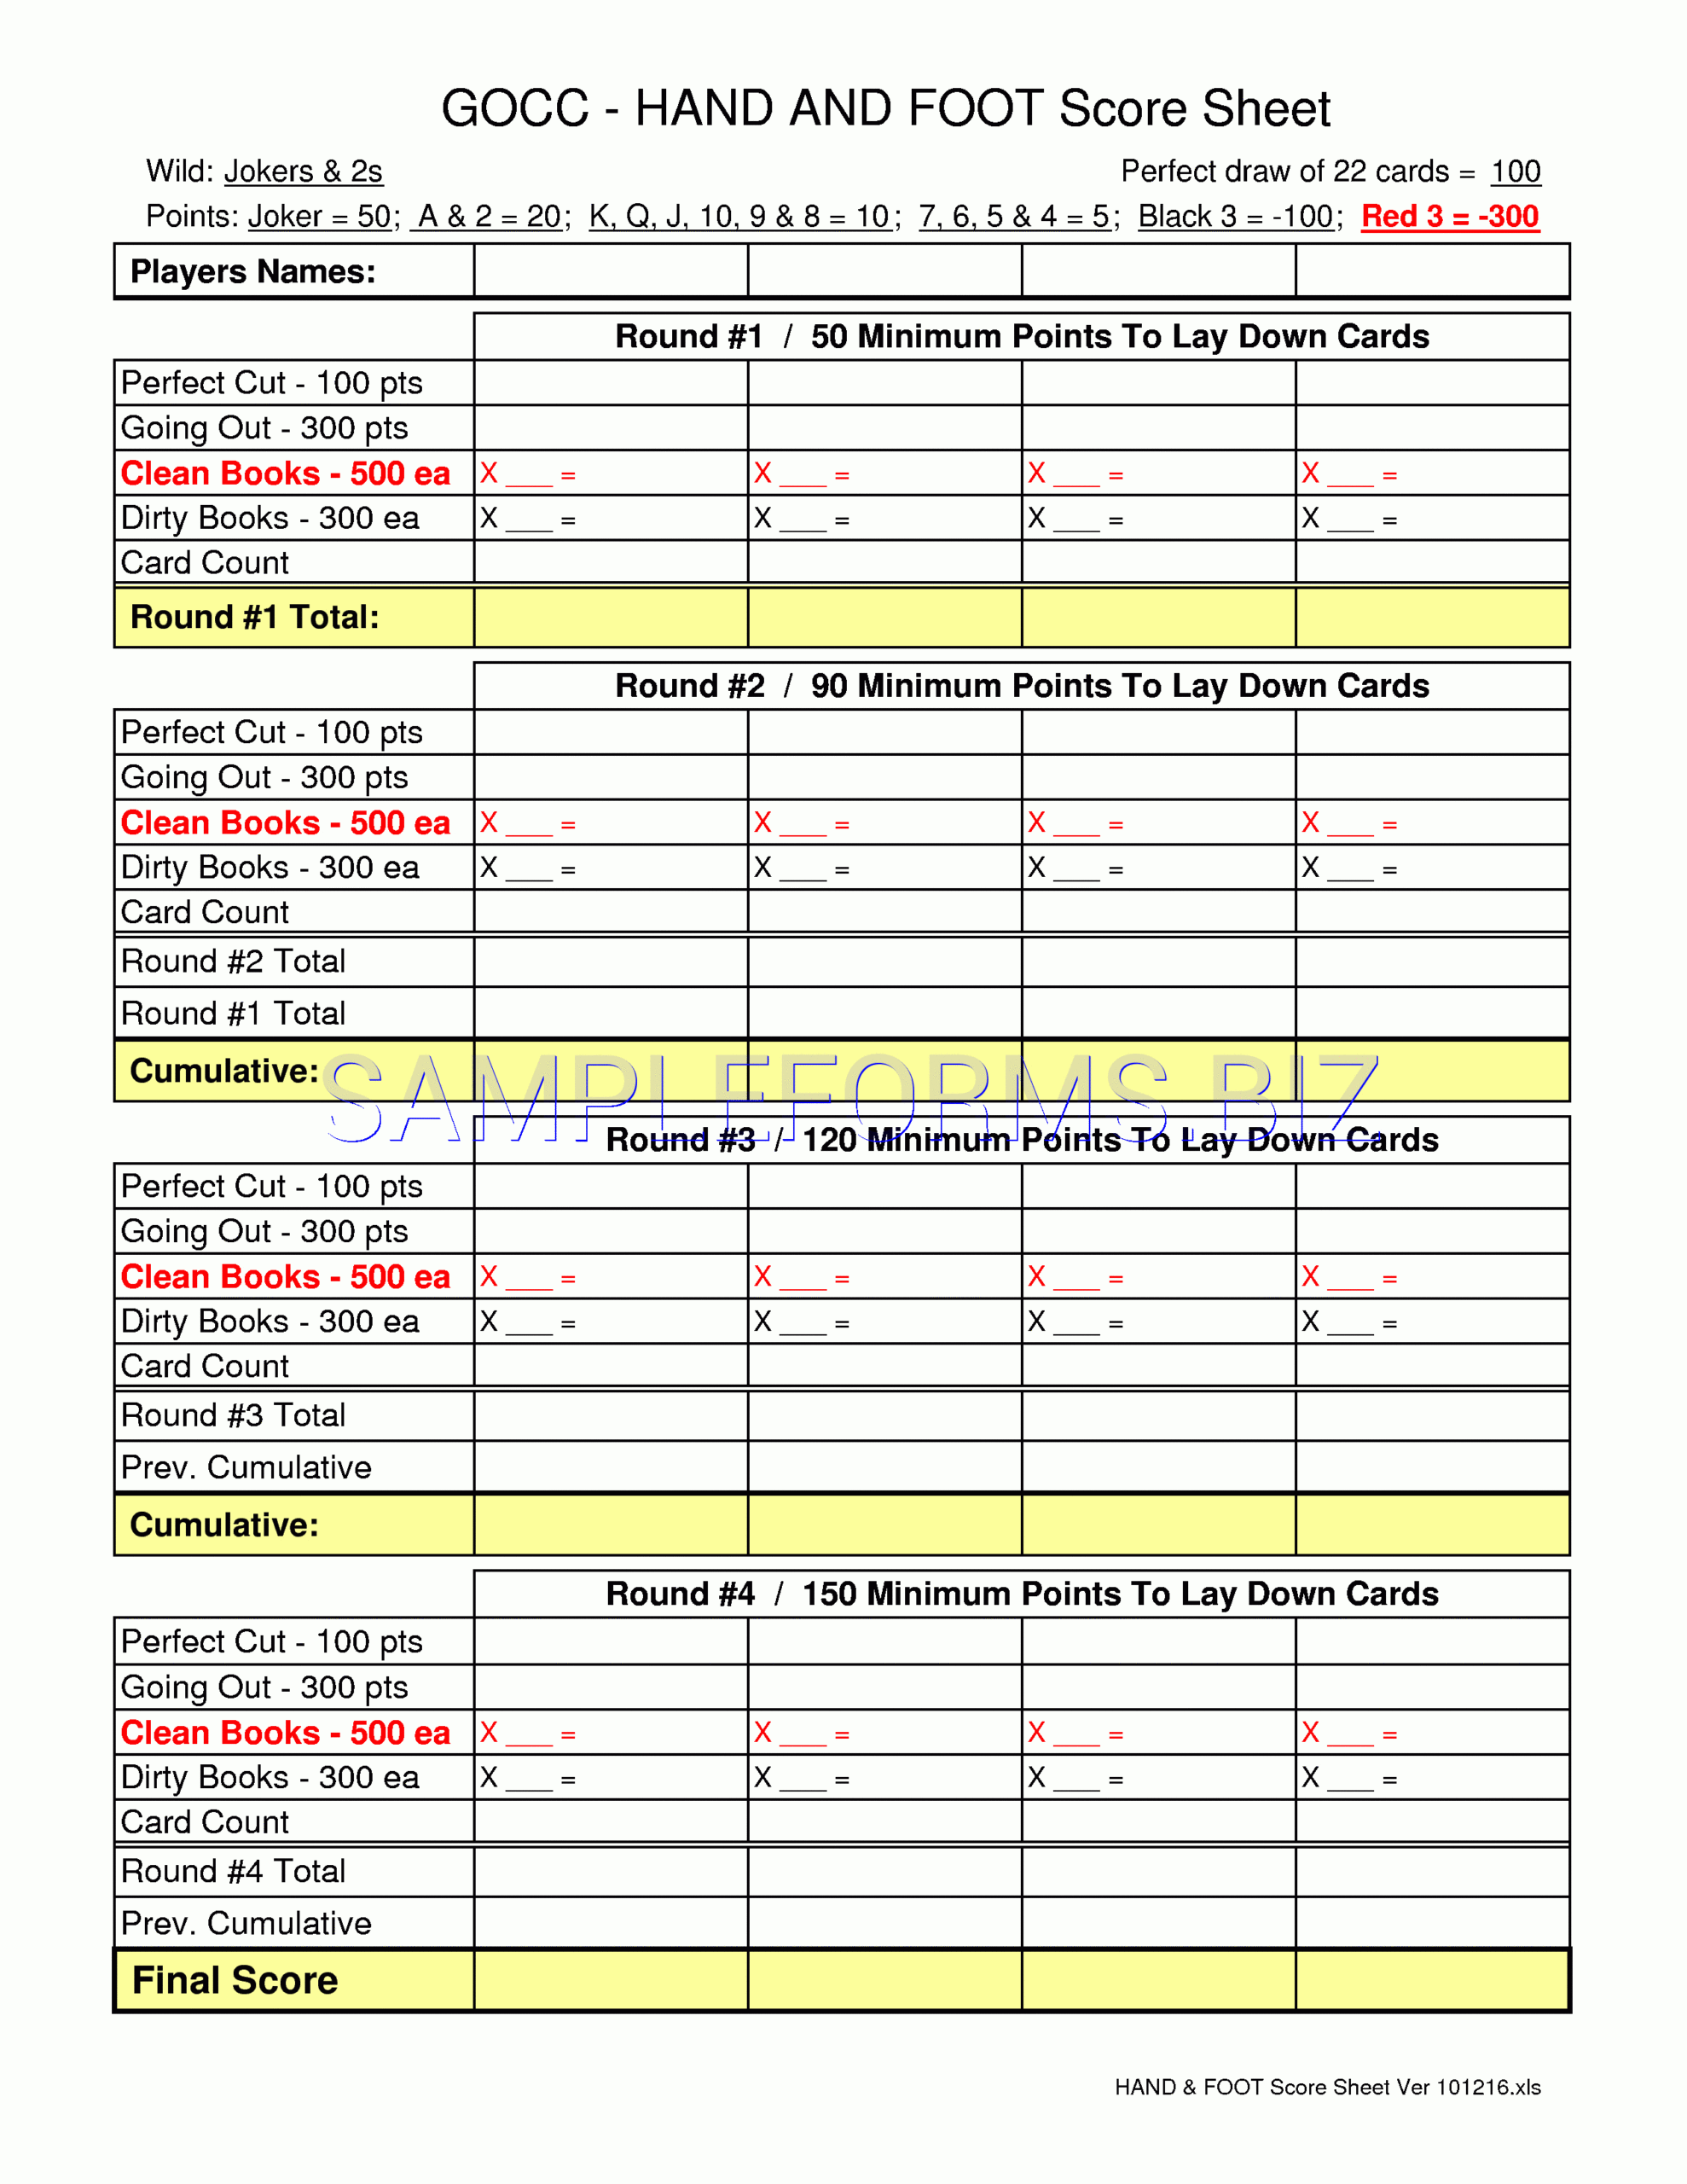 Preview Pdf Hand & Foot Score Sheet 2, 1 With Bridge Score Card Template